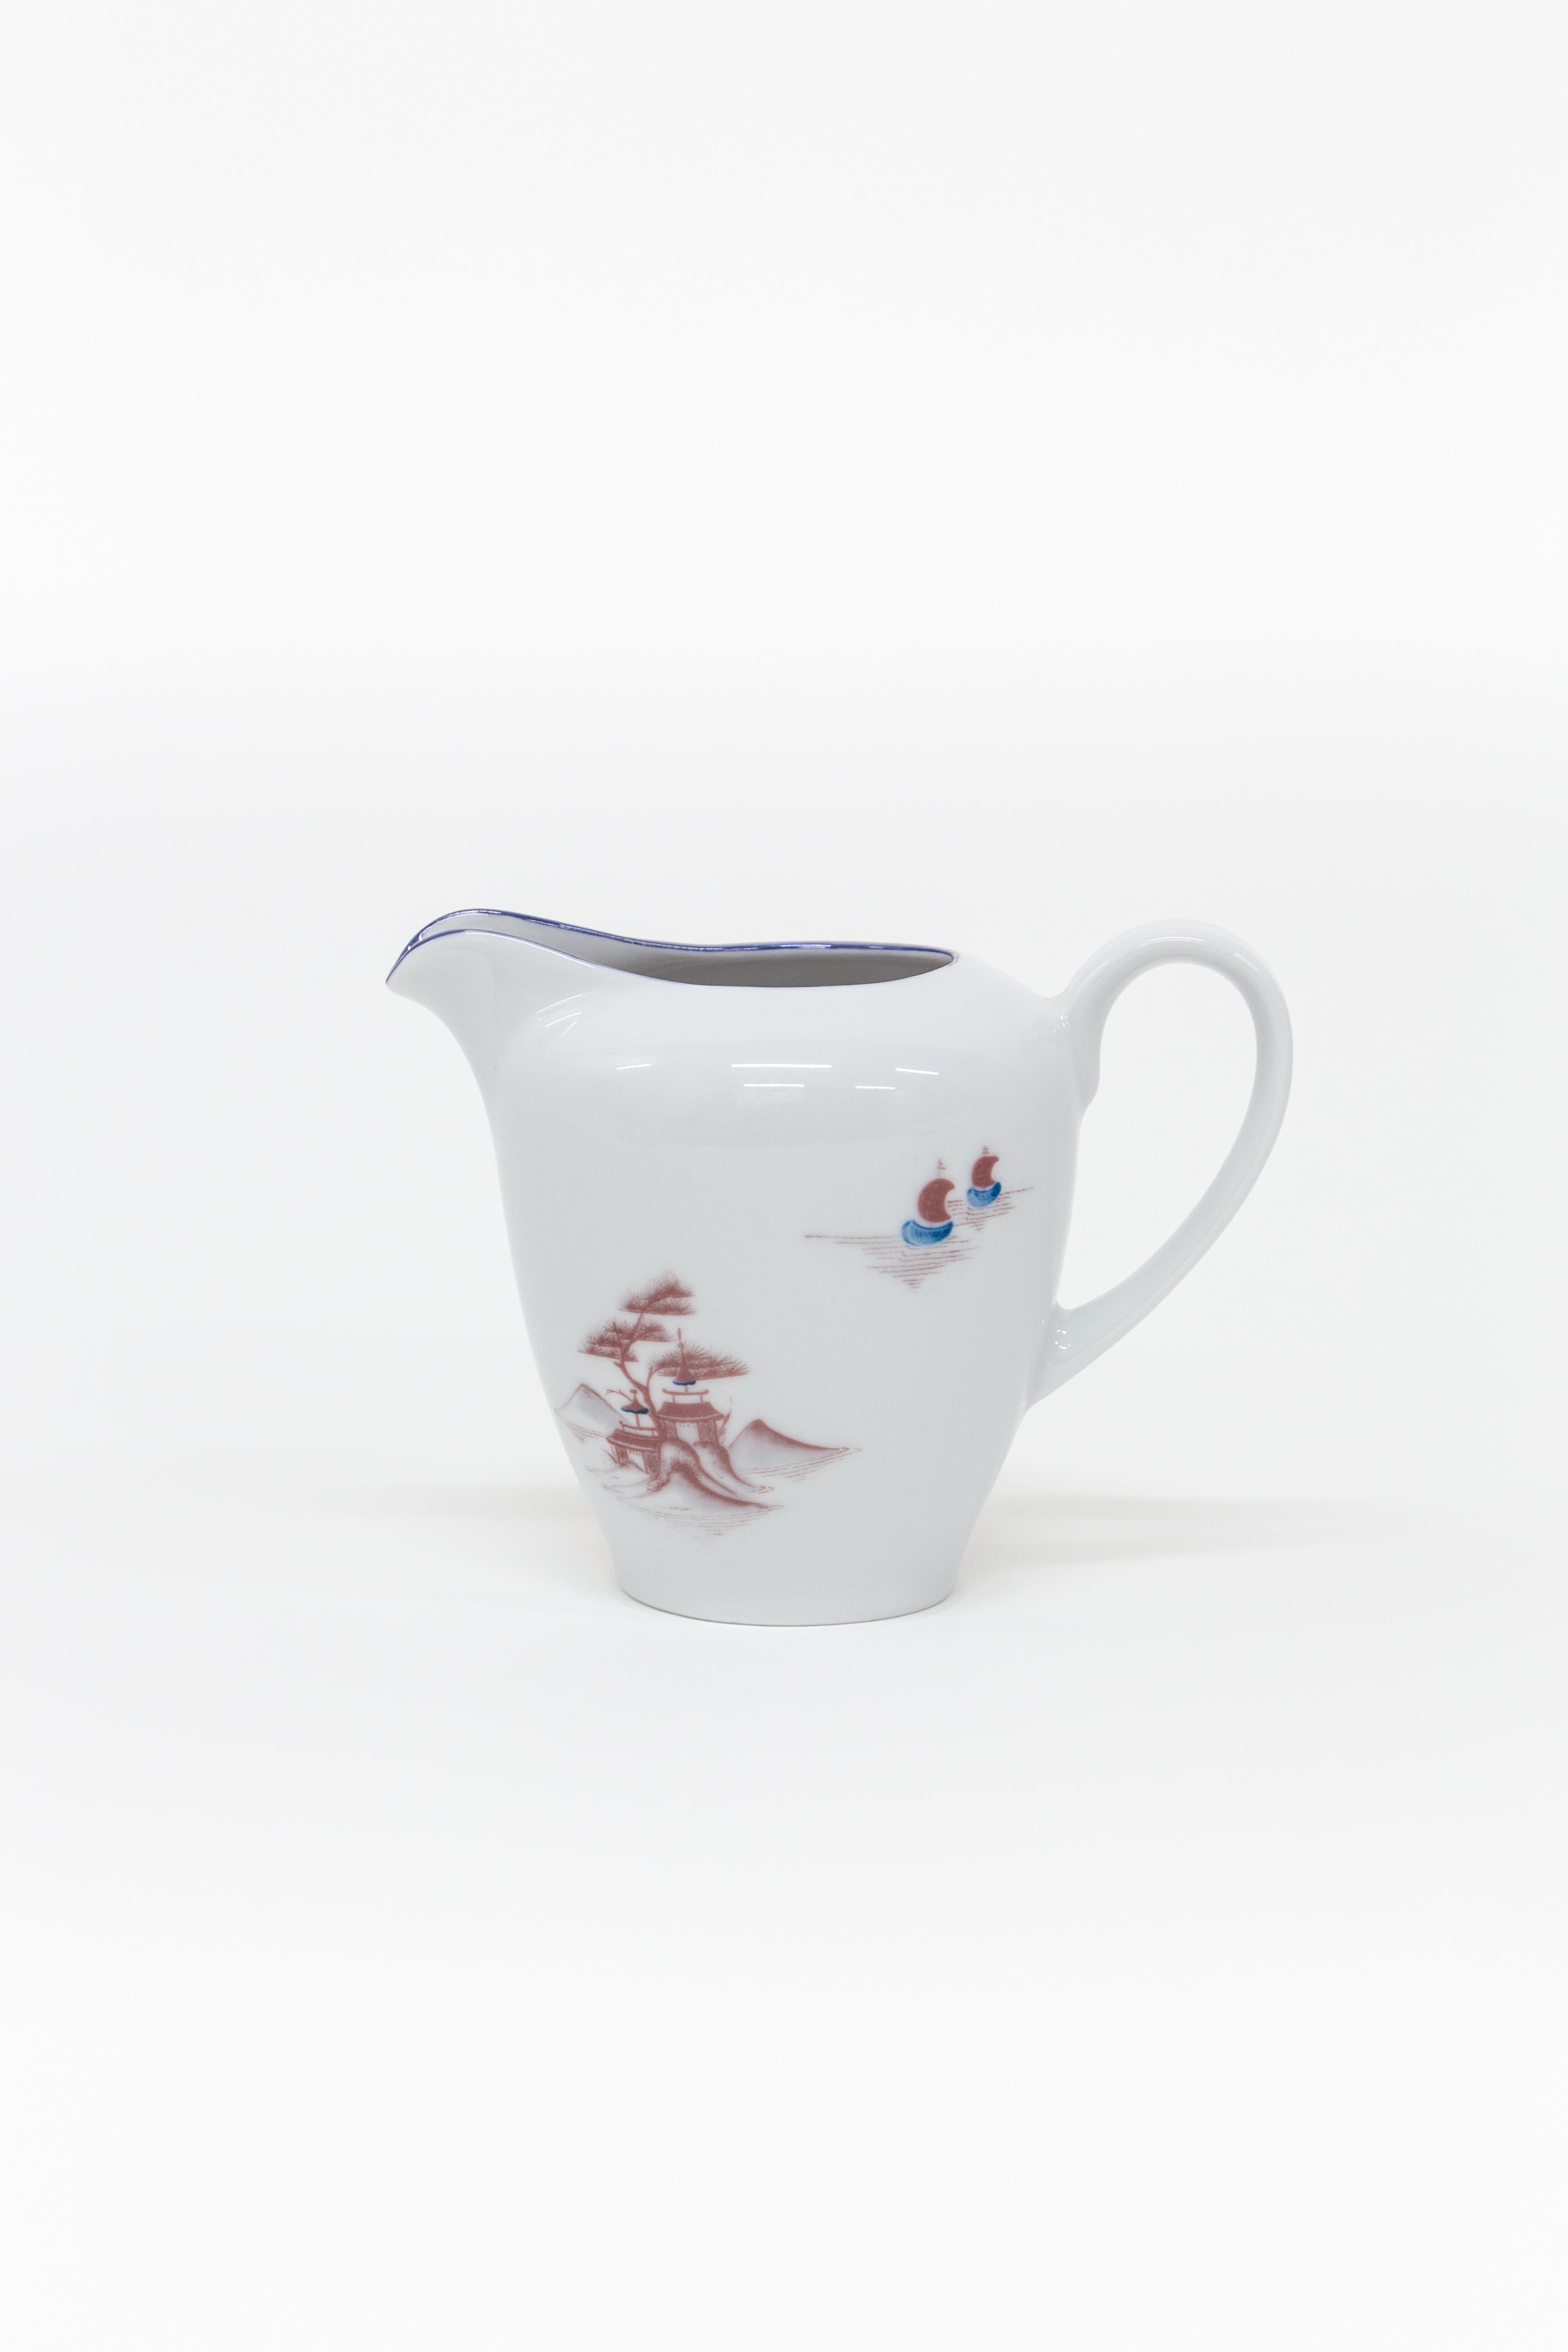 This Tea Time Set is part of the Natsumi Porcelain collection by Grand Tour by Vito Nesta. The Japanese lake landscape shows us figures going about their daily lives, Geisha conversing, men in small rowing boats and other scenes of bucolic life. All